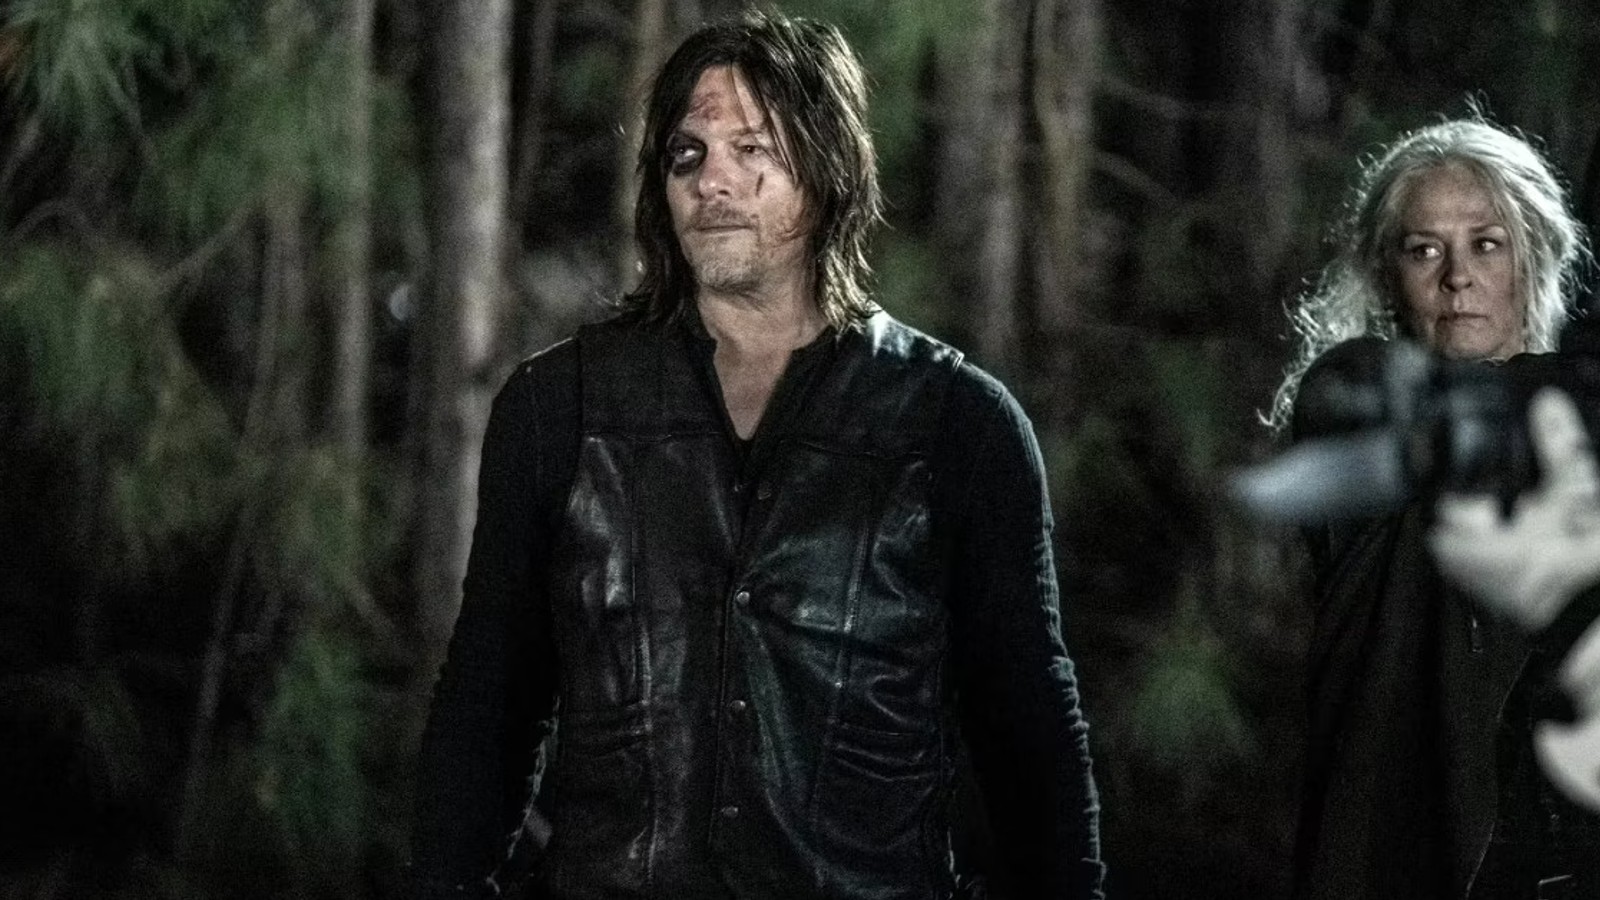 The Walking Dead finale: Who dies and survives?